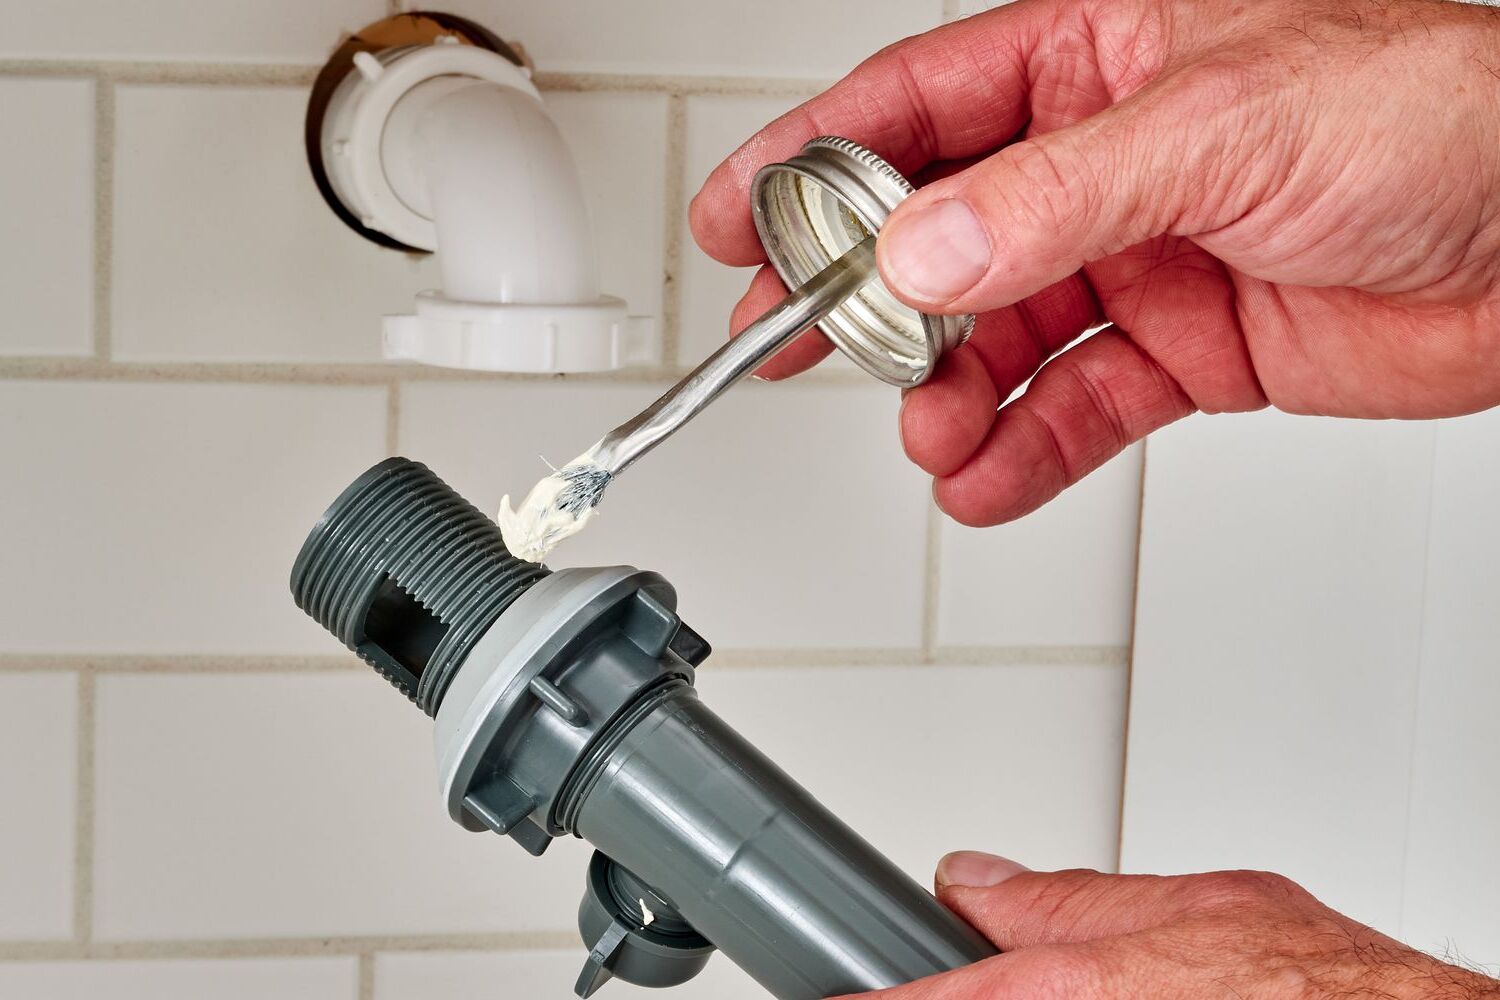 Step-by-step guide to installing a bathroom faucet